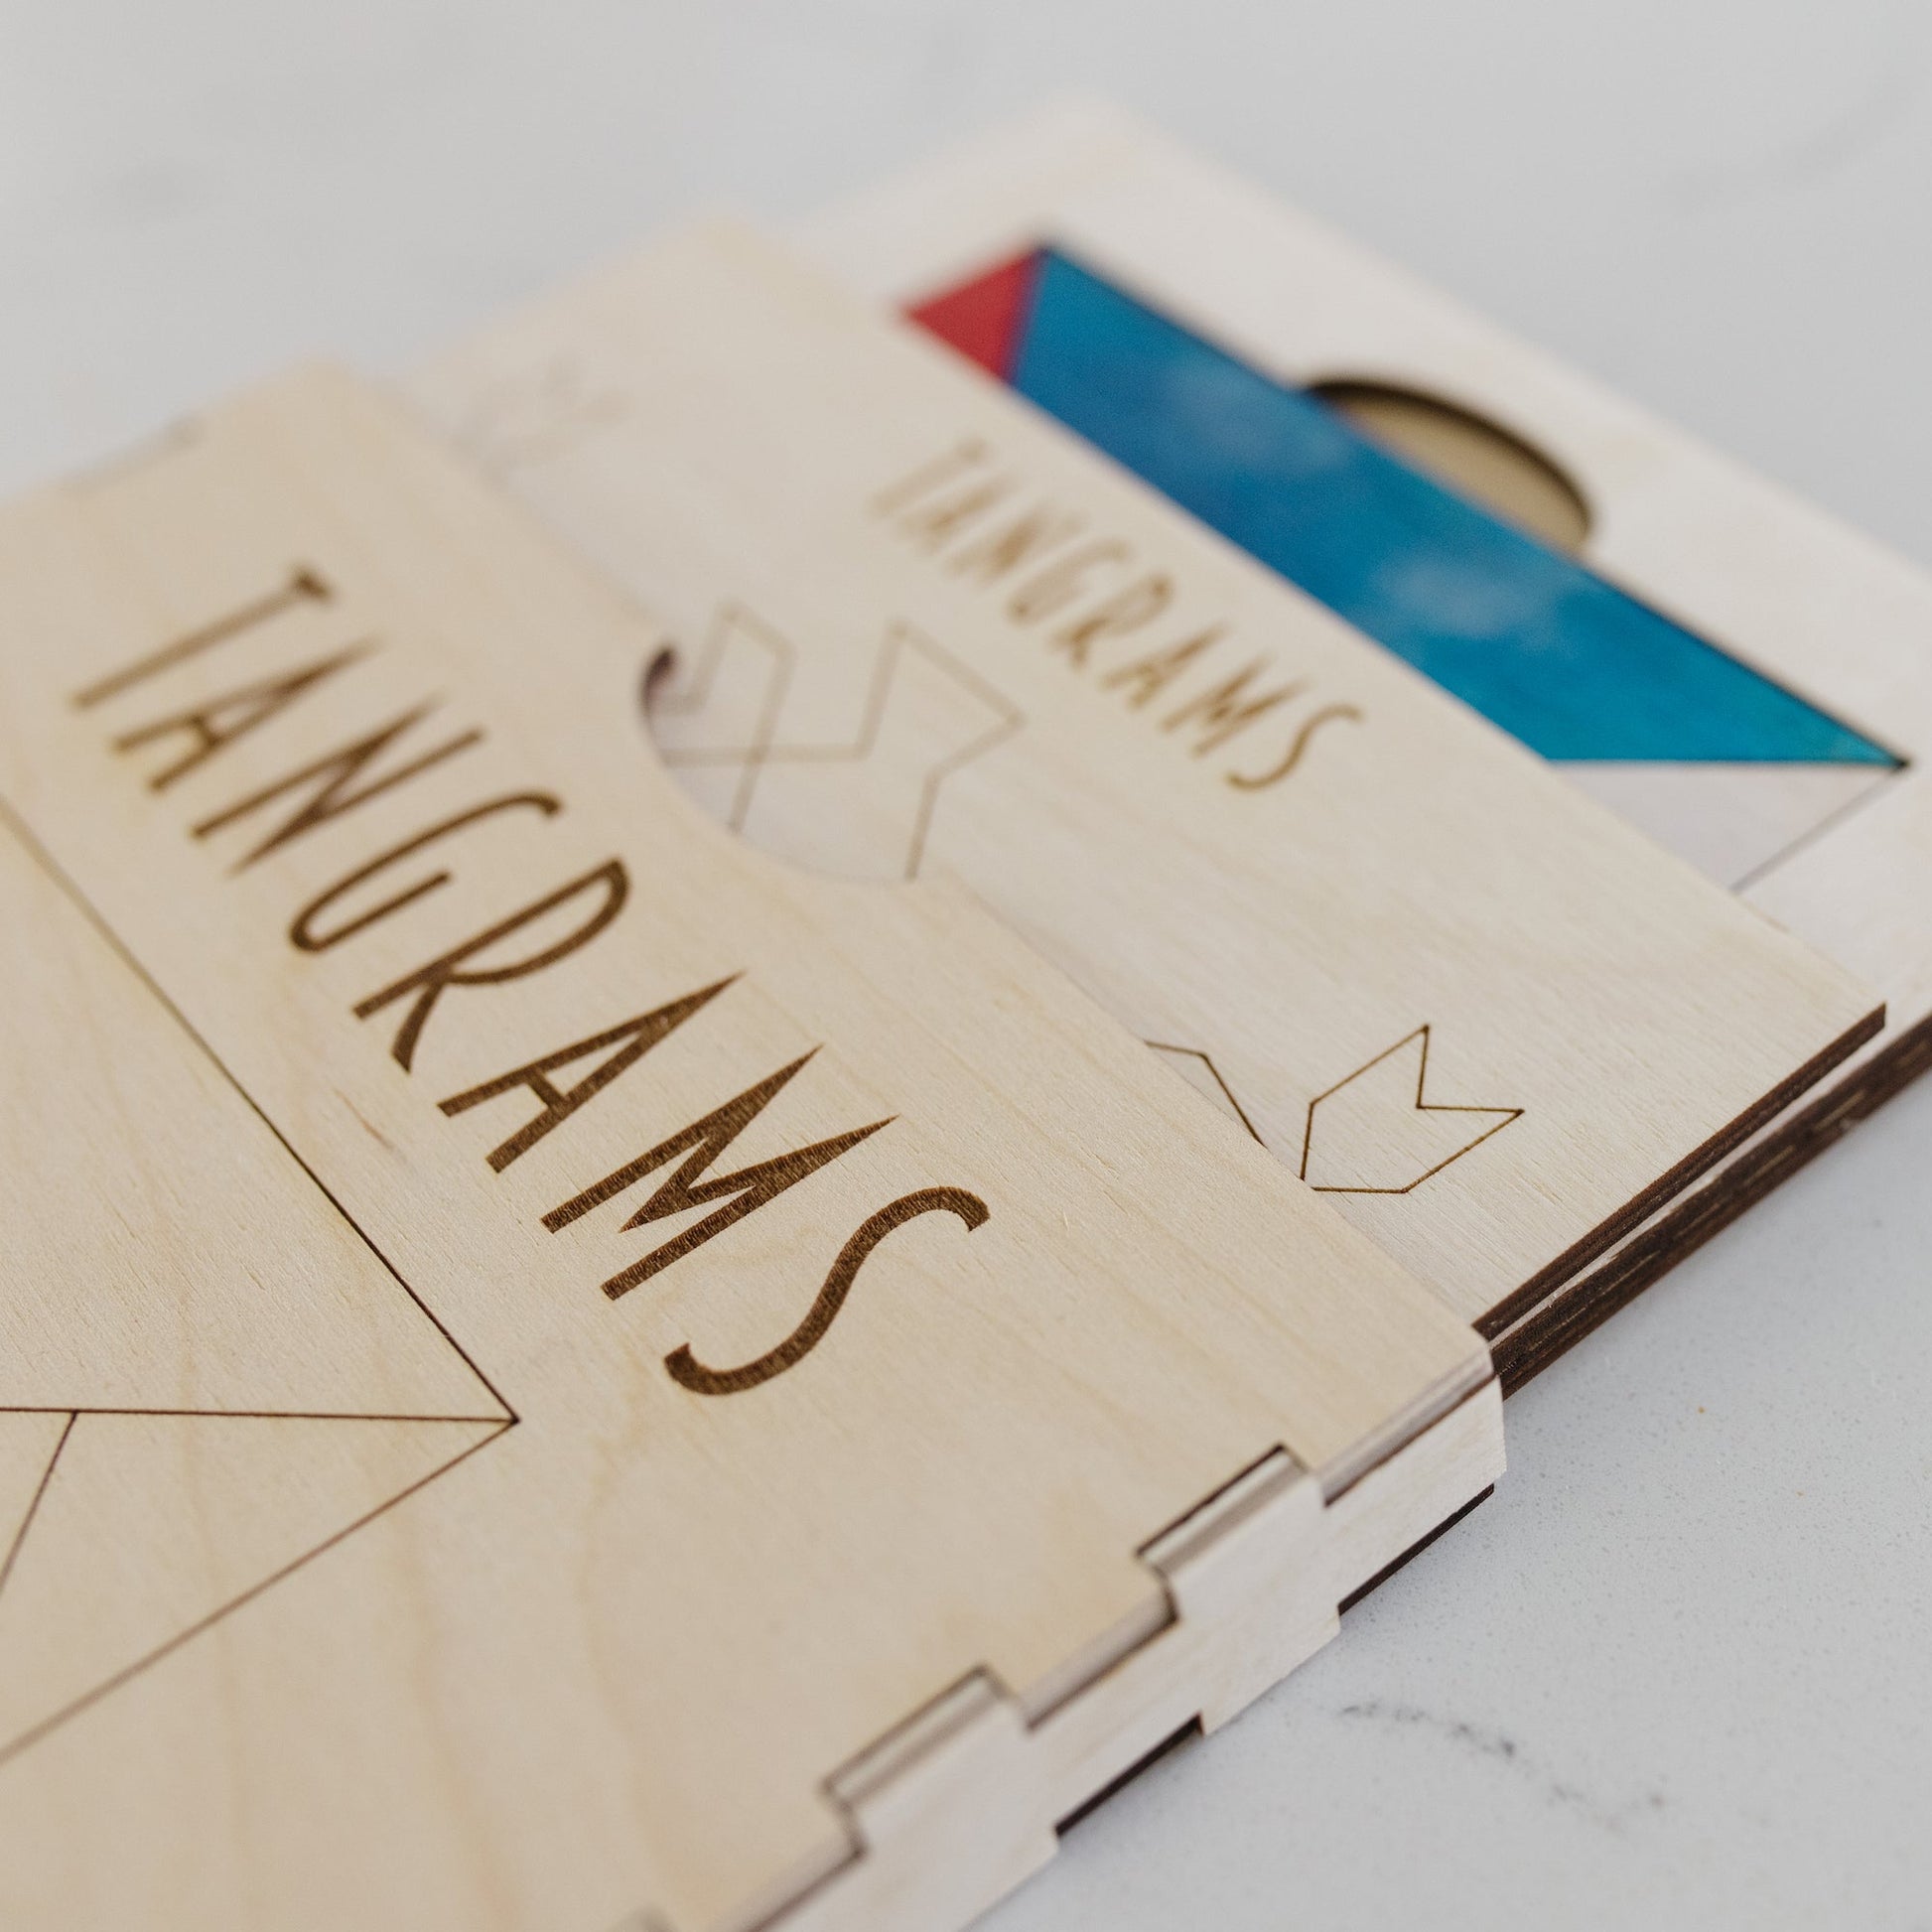 Tangrams Puzzles - laser cut and engraved wood - by LeeMo Designs in Bend, Oregon